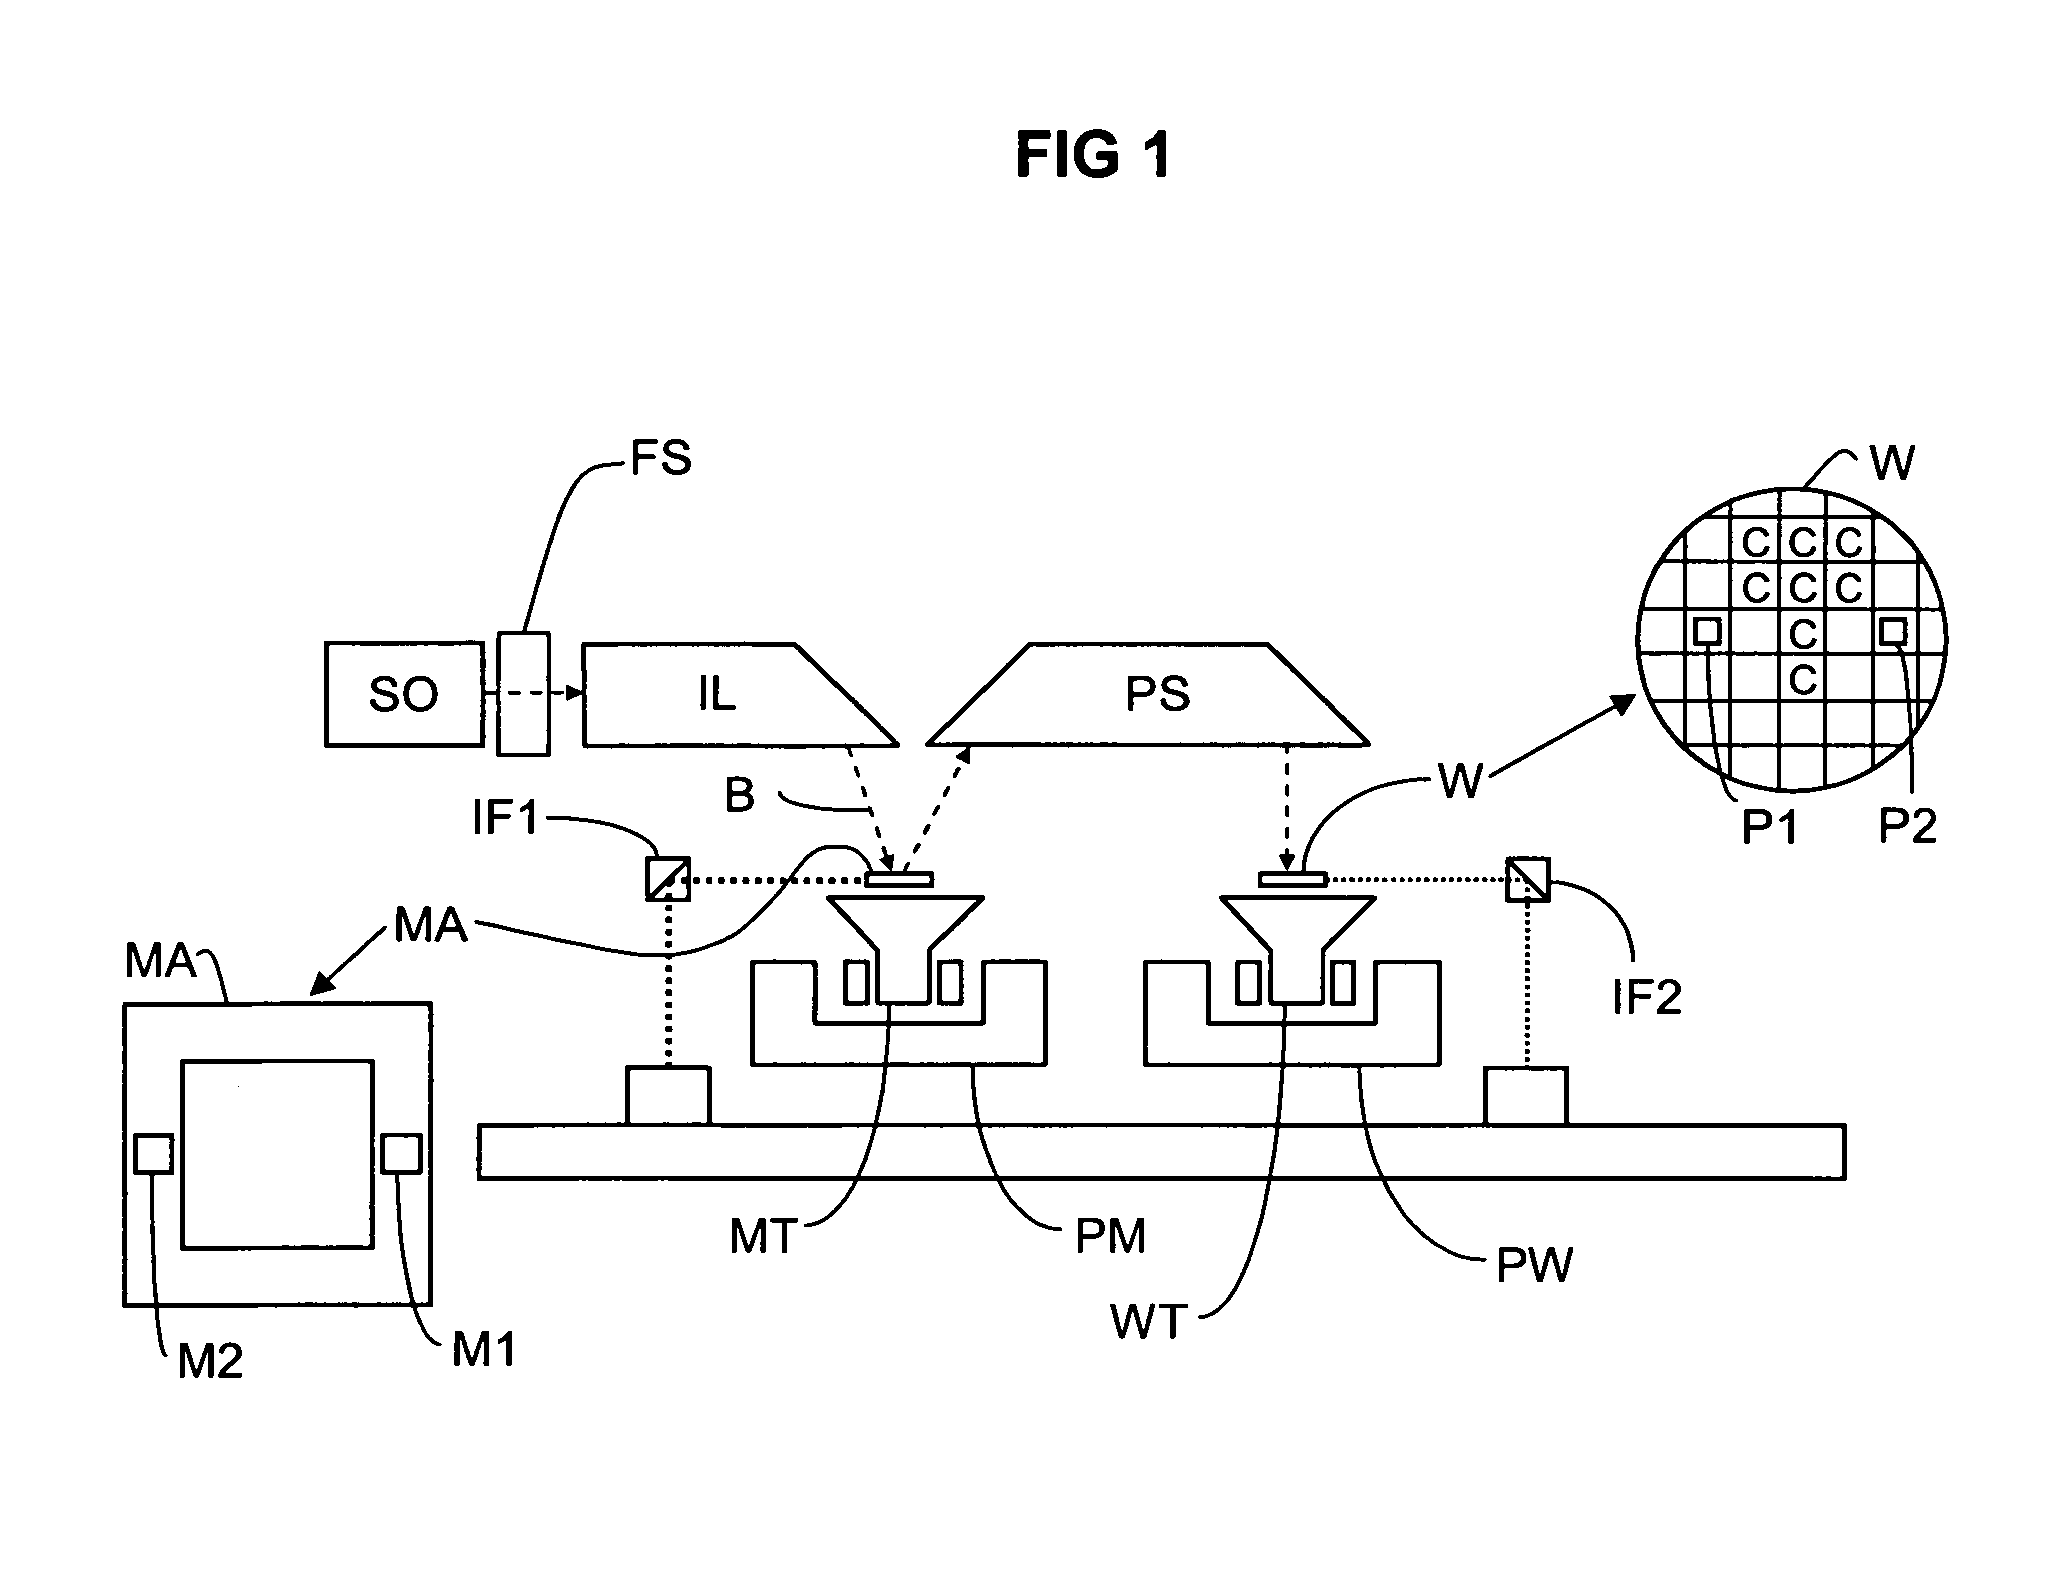 Apparatus including a radiation source, a filter system for filtering particles out of radiation emitted by the source, and a processing system for processing the radiation, a lithographic apparatus including such an apparatus, and a method of filtering particles out of radiation emitting and propagating from a radiation source